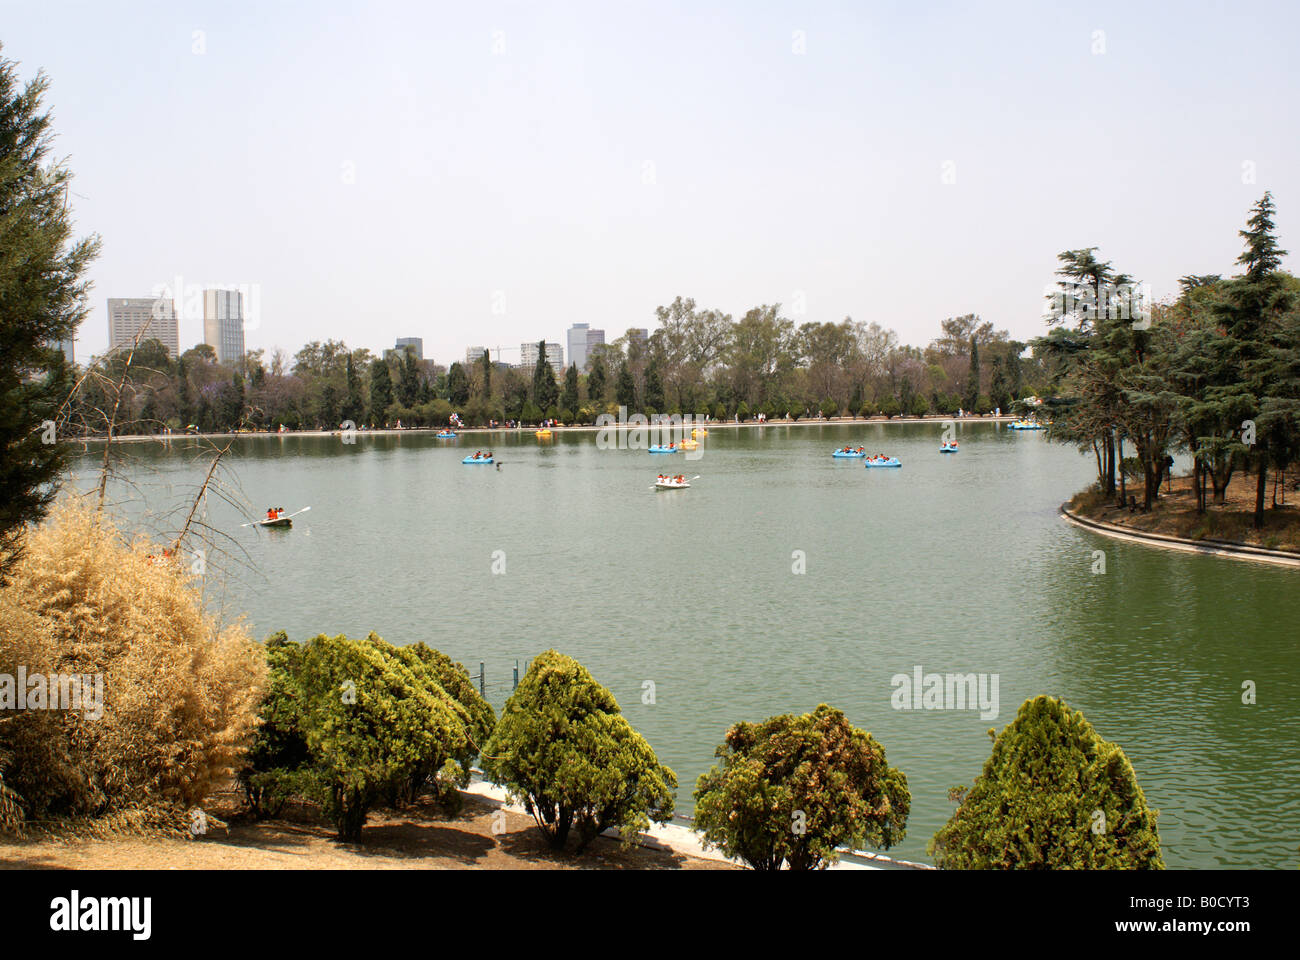 Rental boats on the Lago Mayor lake in the Second Section of Chapultepec Park, Mexico City Stock Photo